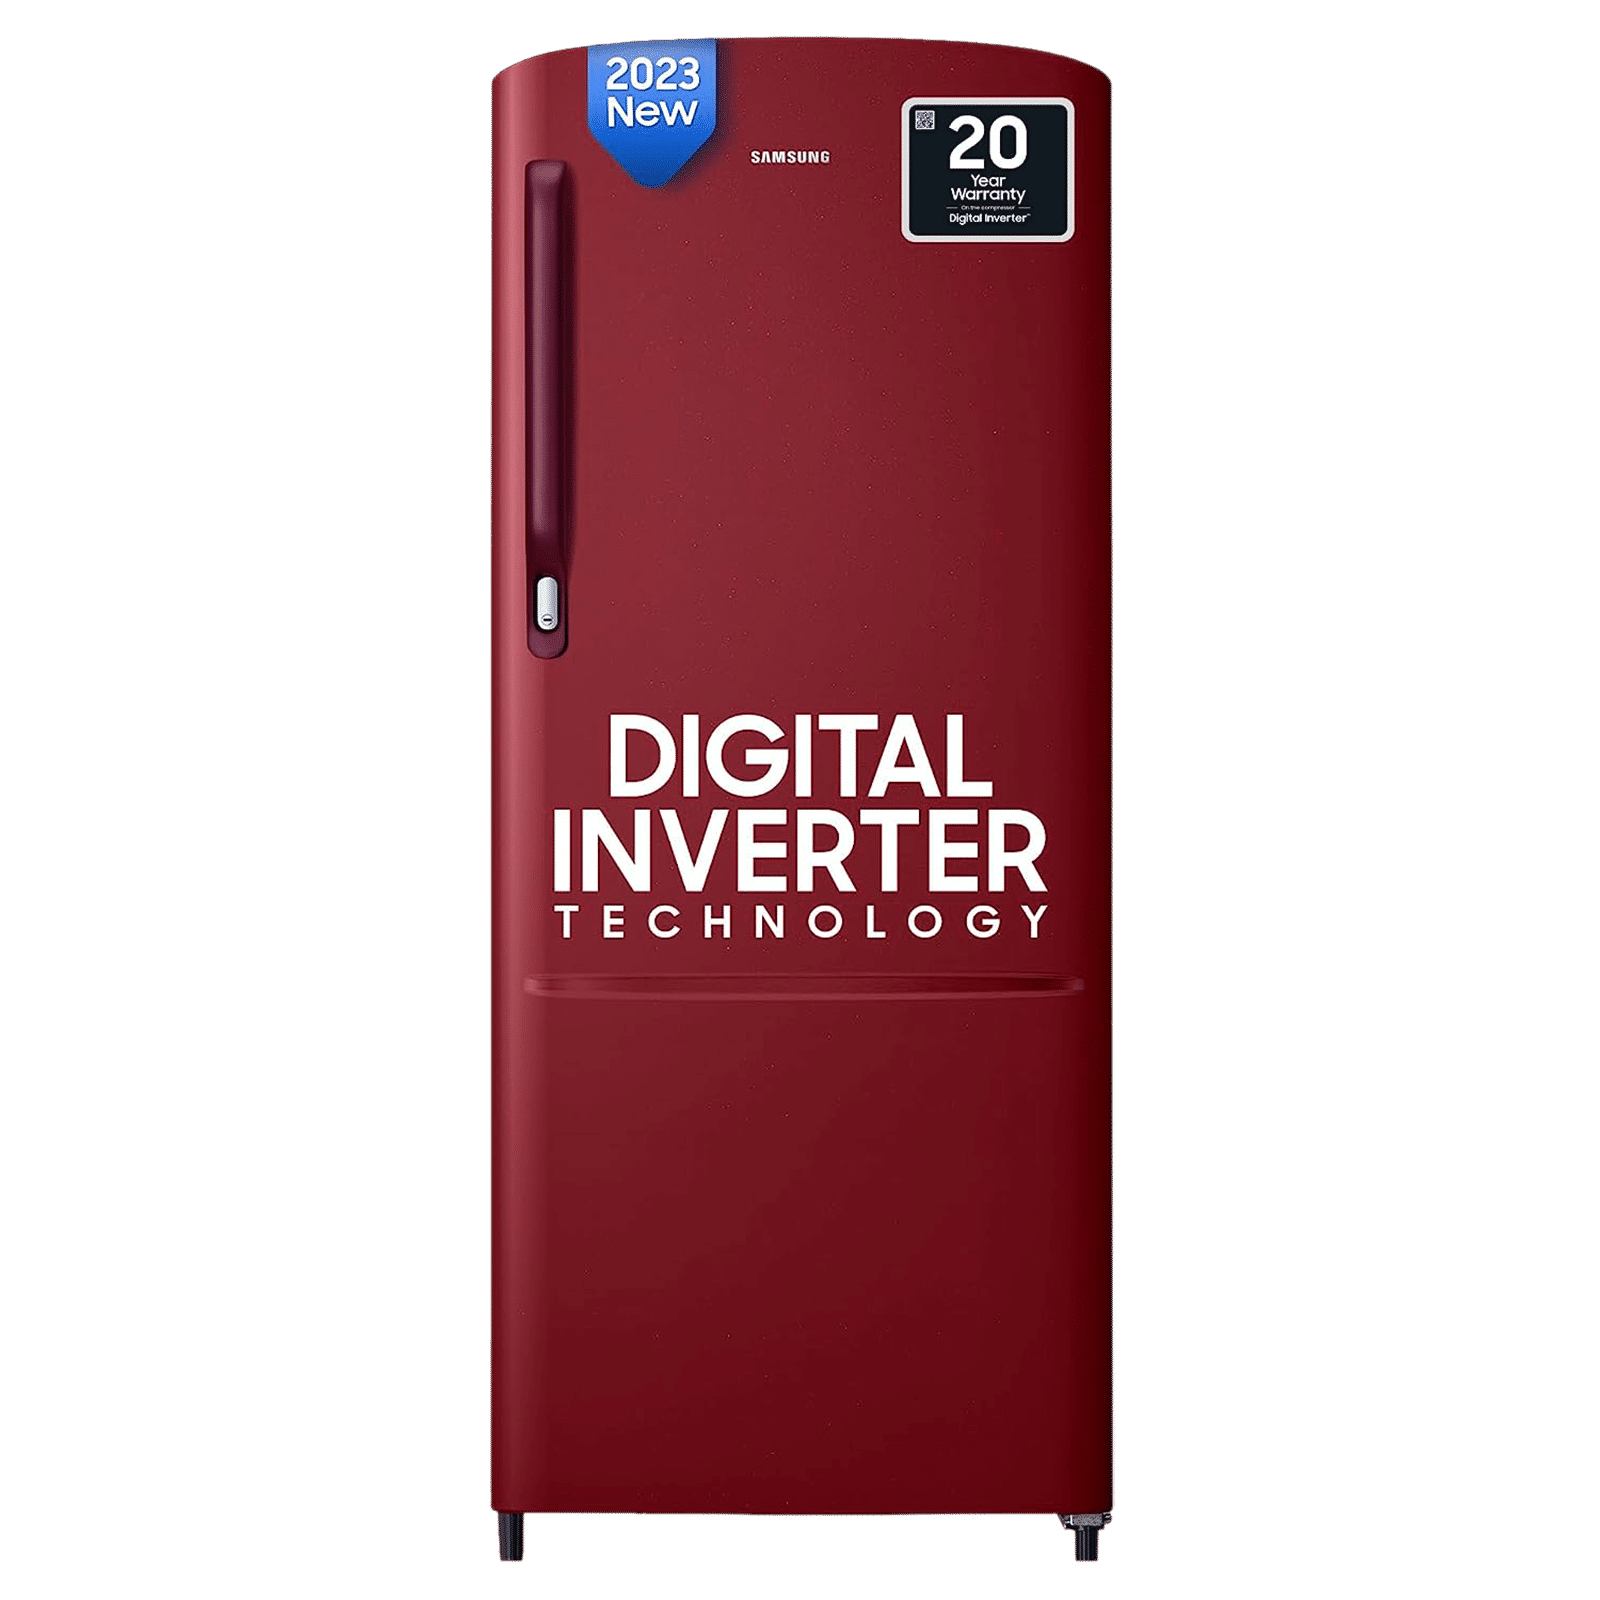 SAMSUNG 183 Litres 2 Star Direct Cool Single Door Refrigerator with Toughened Glass Shelves (RR20C2412RH/NL, Scarlet Red)